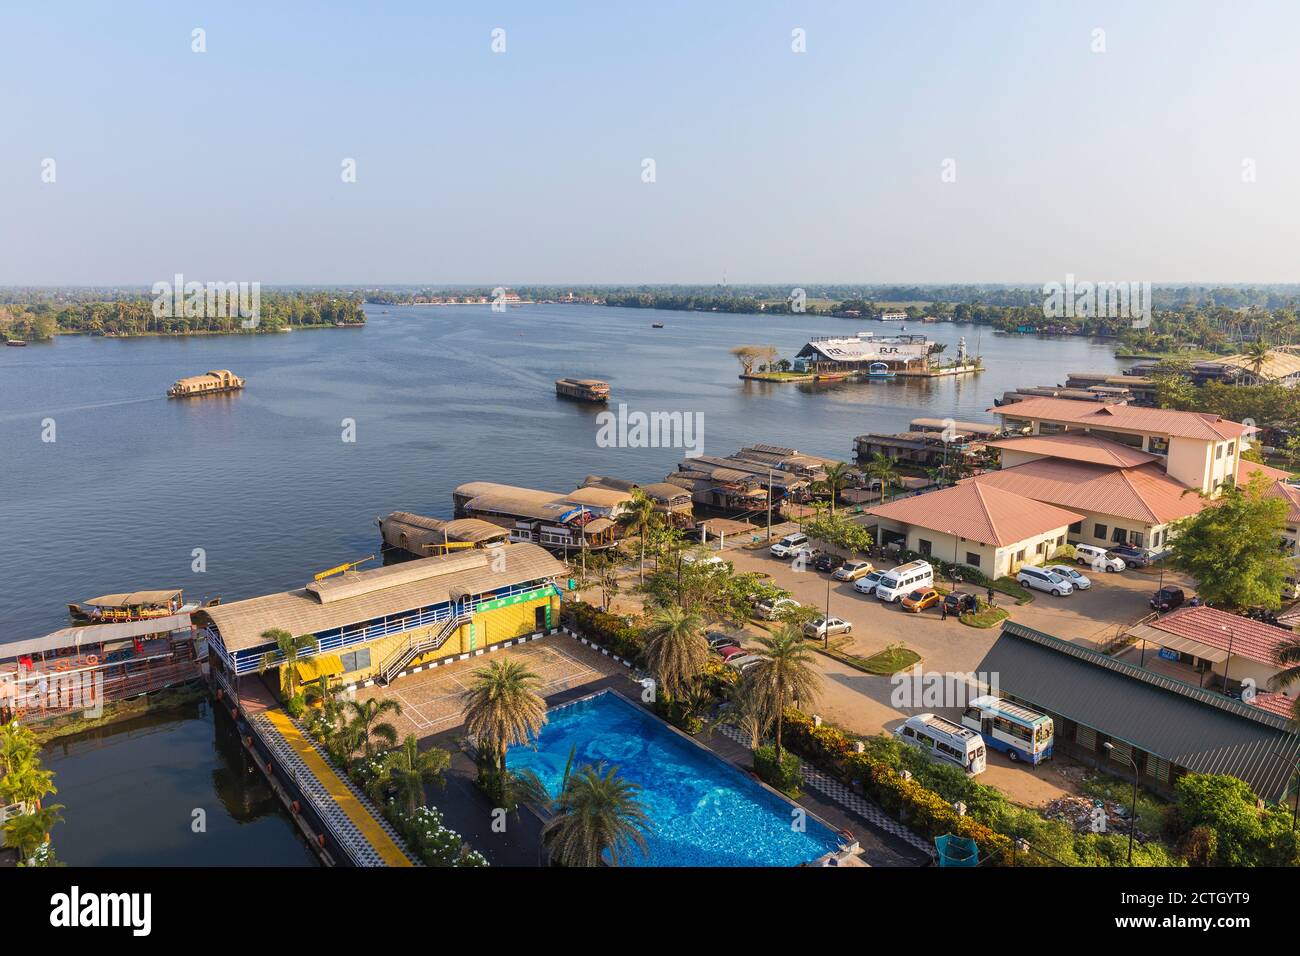 India, Kerala, Alappuzha (Alleppey), View over hotel swimming pool towards houseboats on backwaters Stock Photo